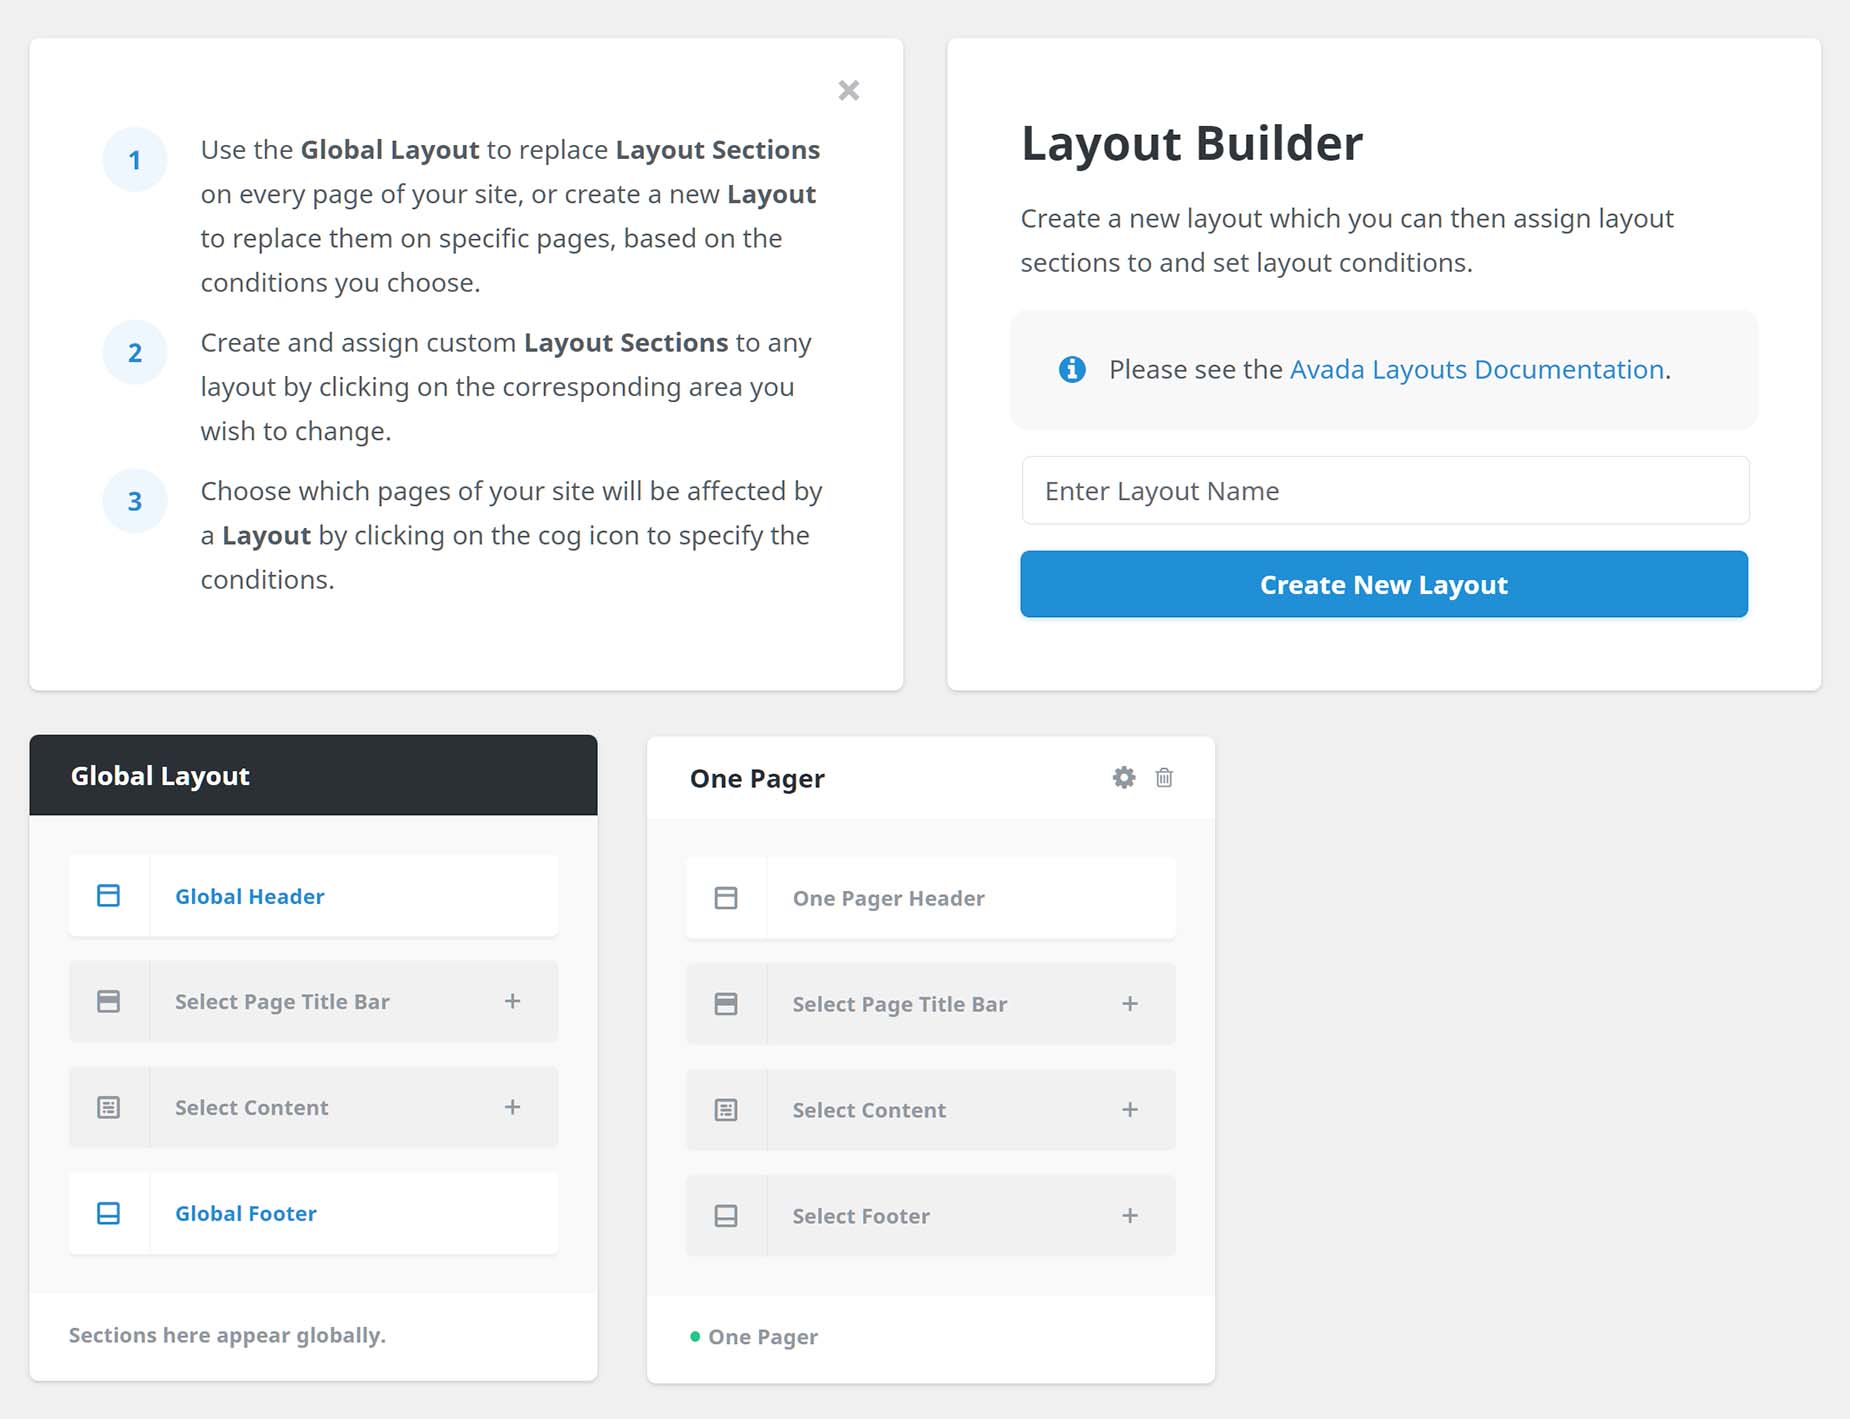 Layouts for One Pager On Multi-page Site